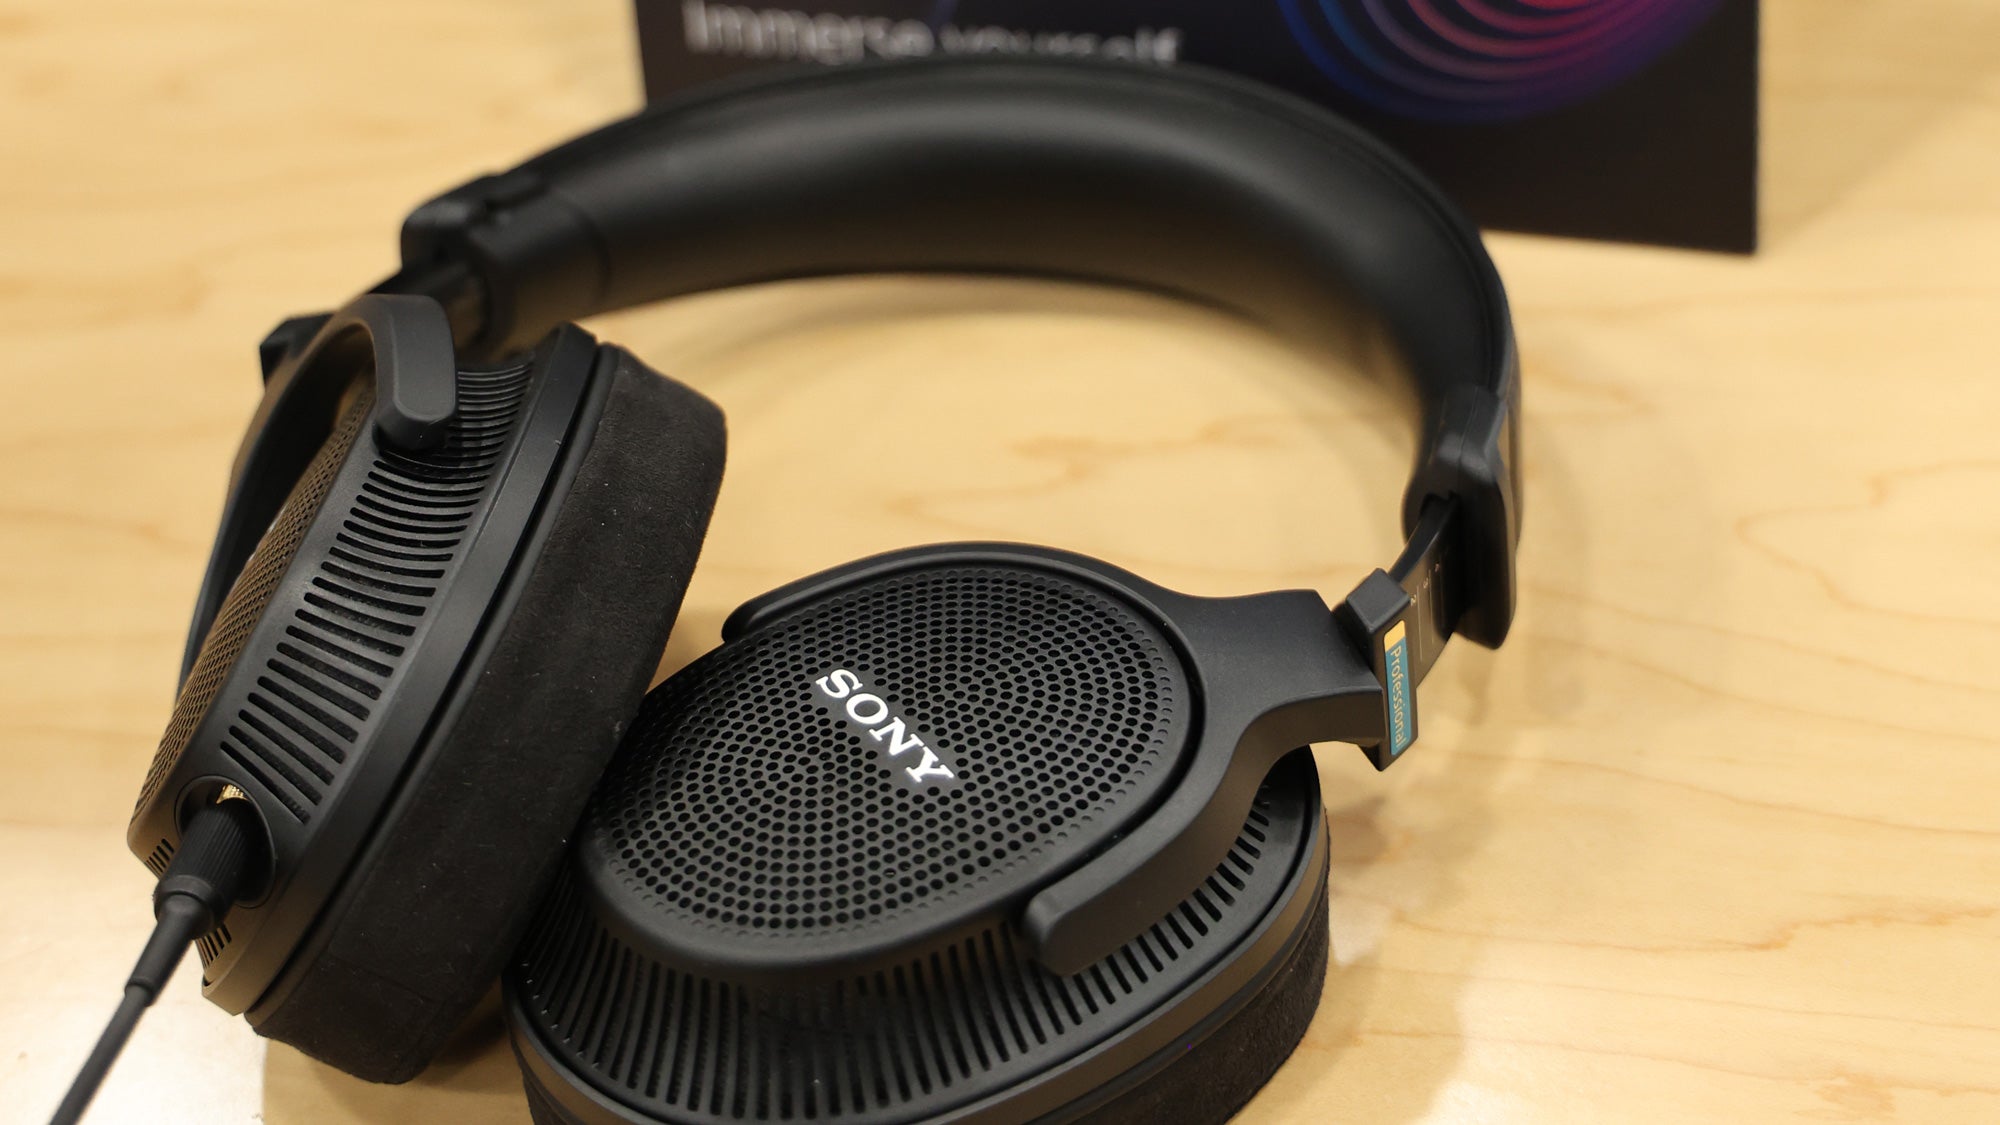 Sony's new headphones are for spatial audio production | Popular